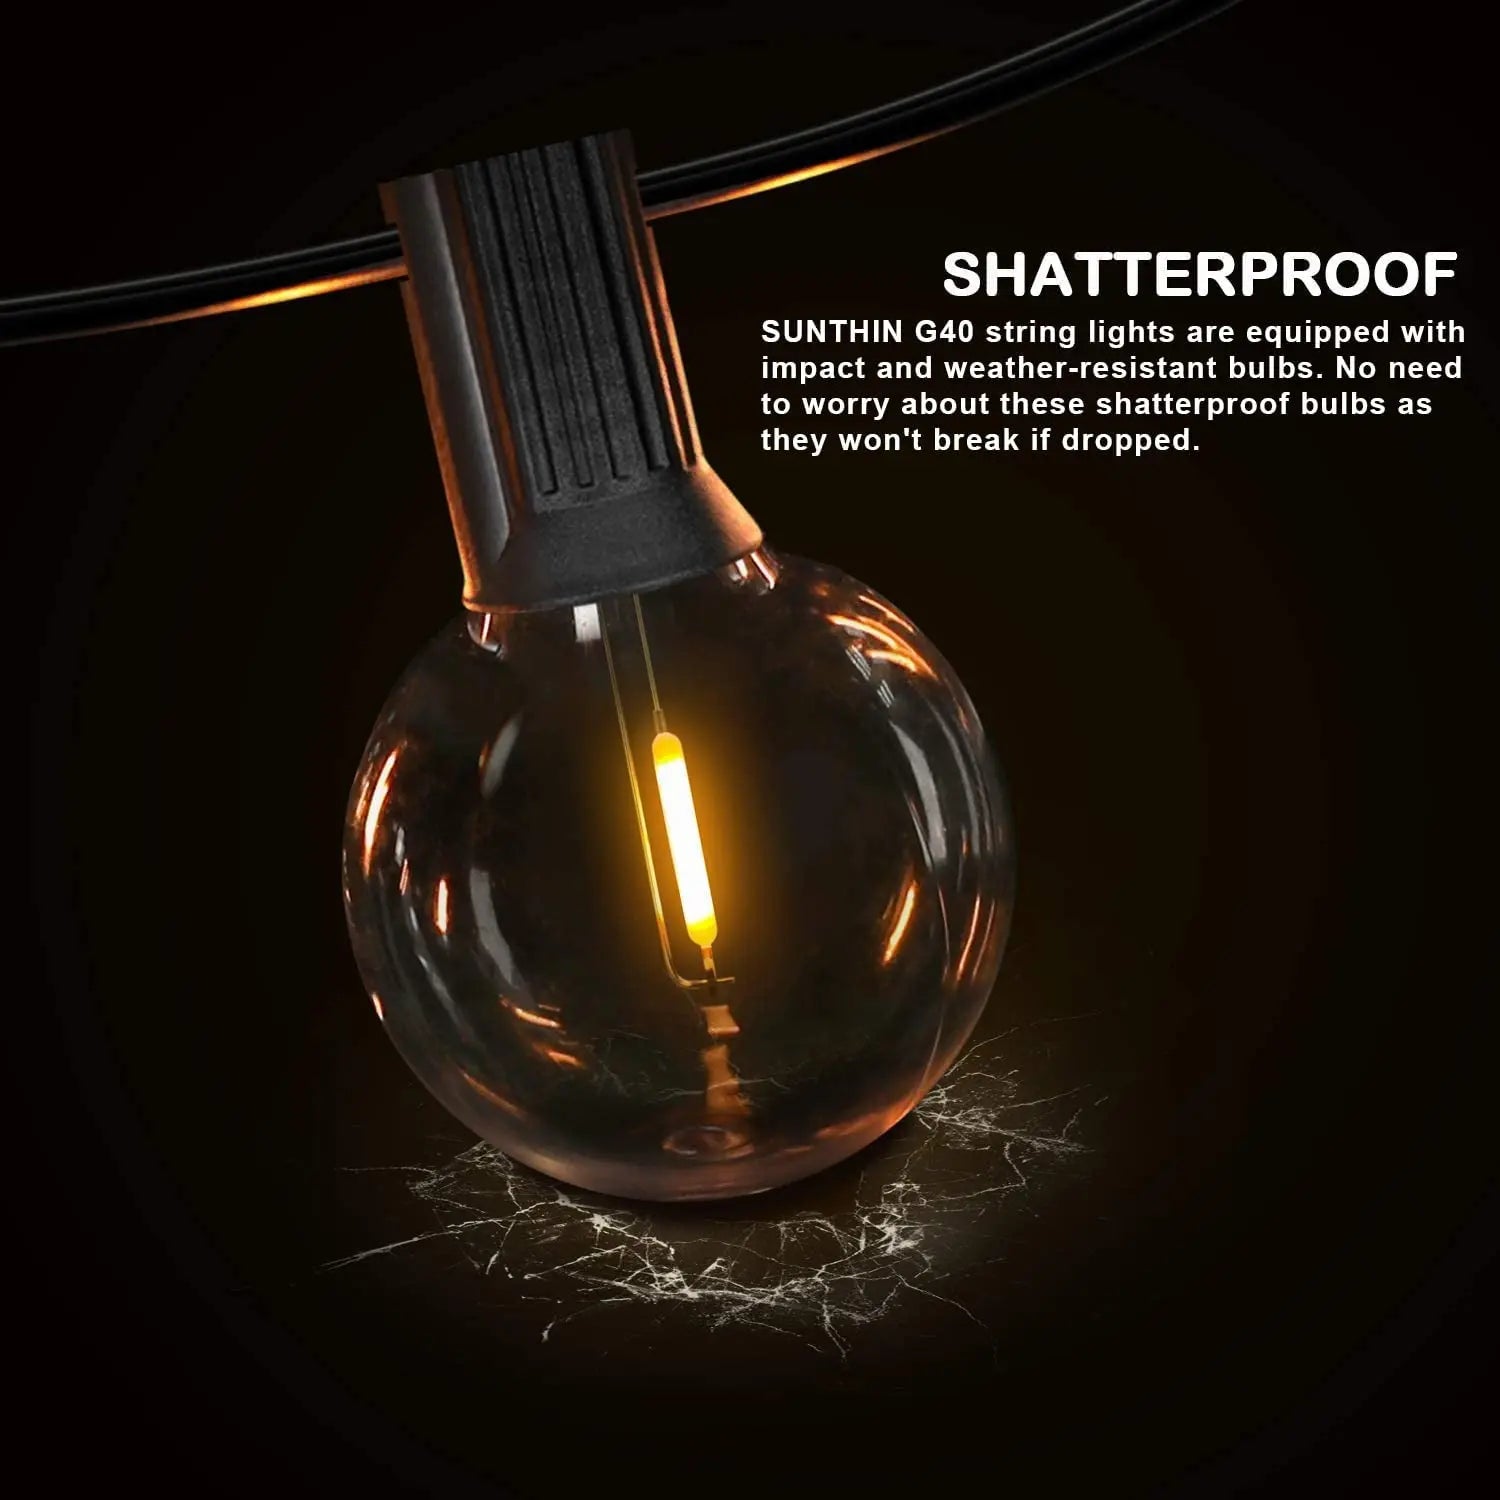 LED G40 Globe String Light, Durable Shatterproof LED Bulbs: Weather-Proof and Drop-Resistant for Long-Lasting Use.